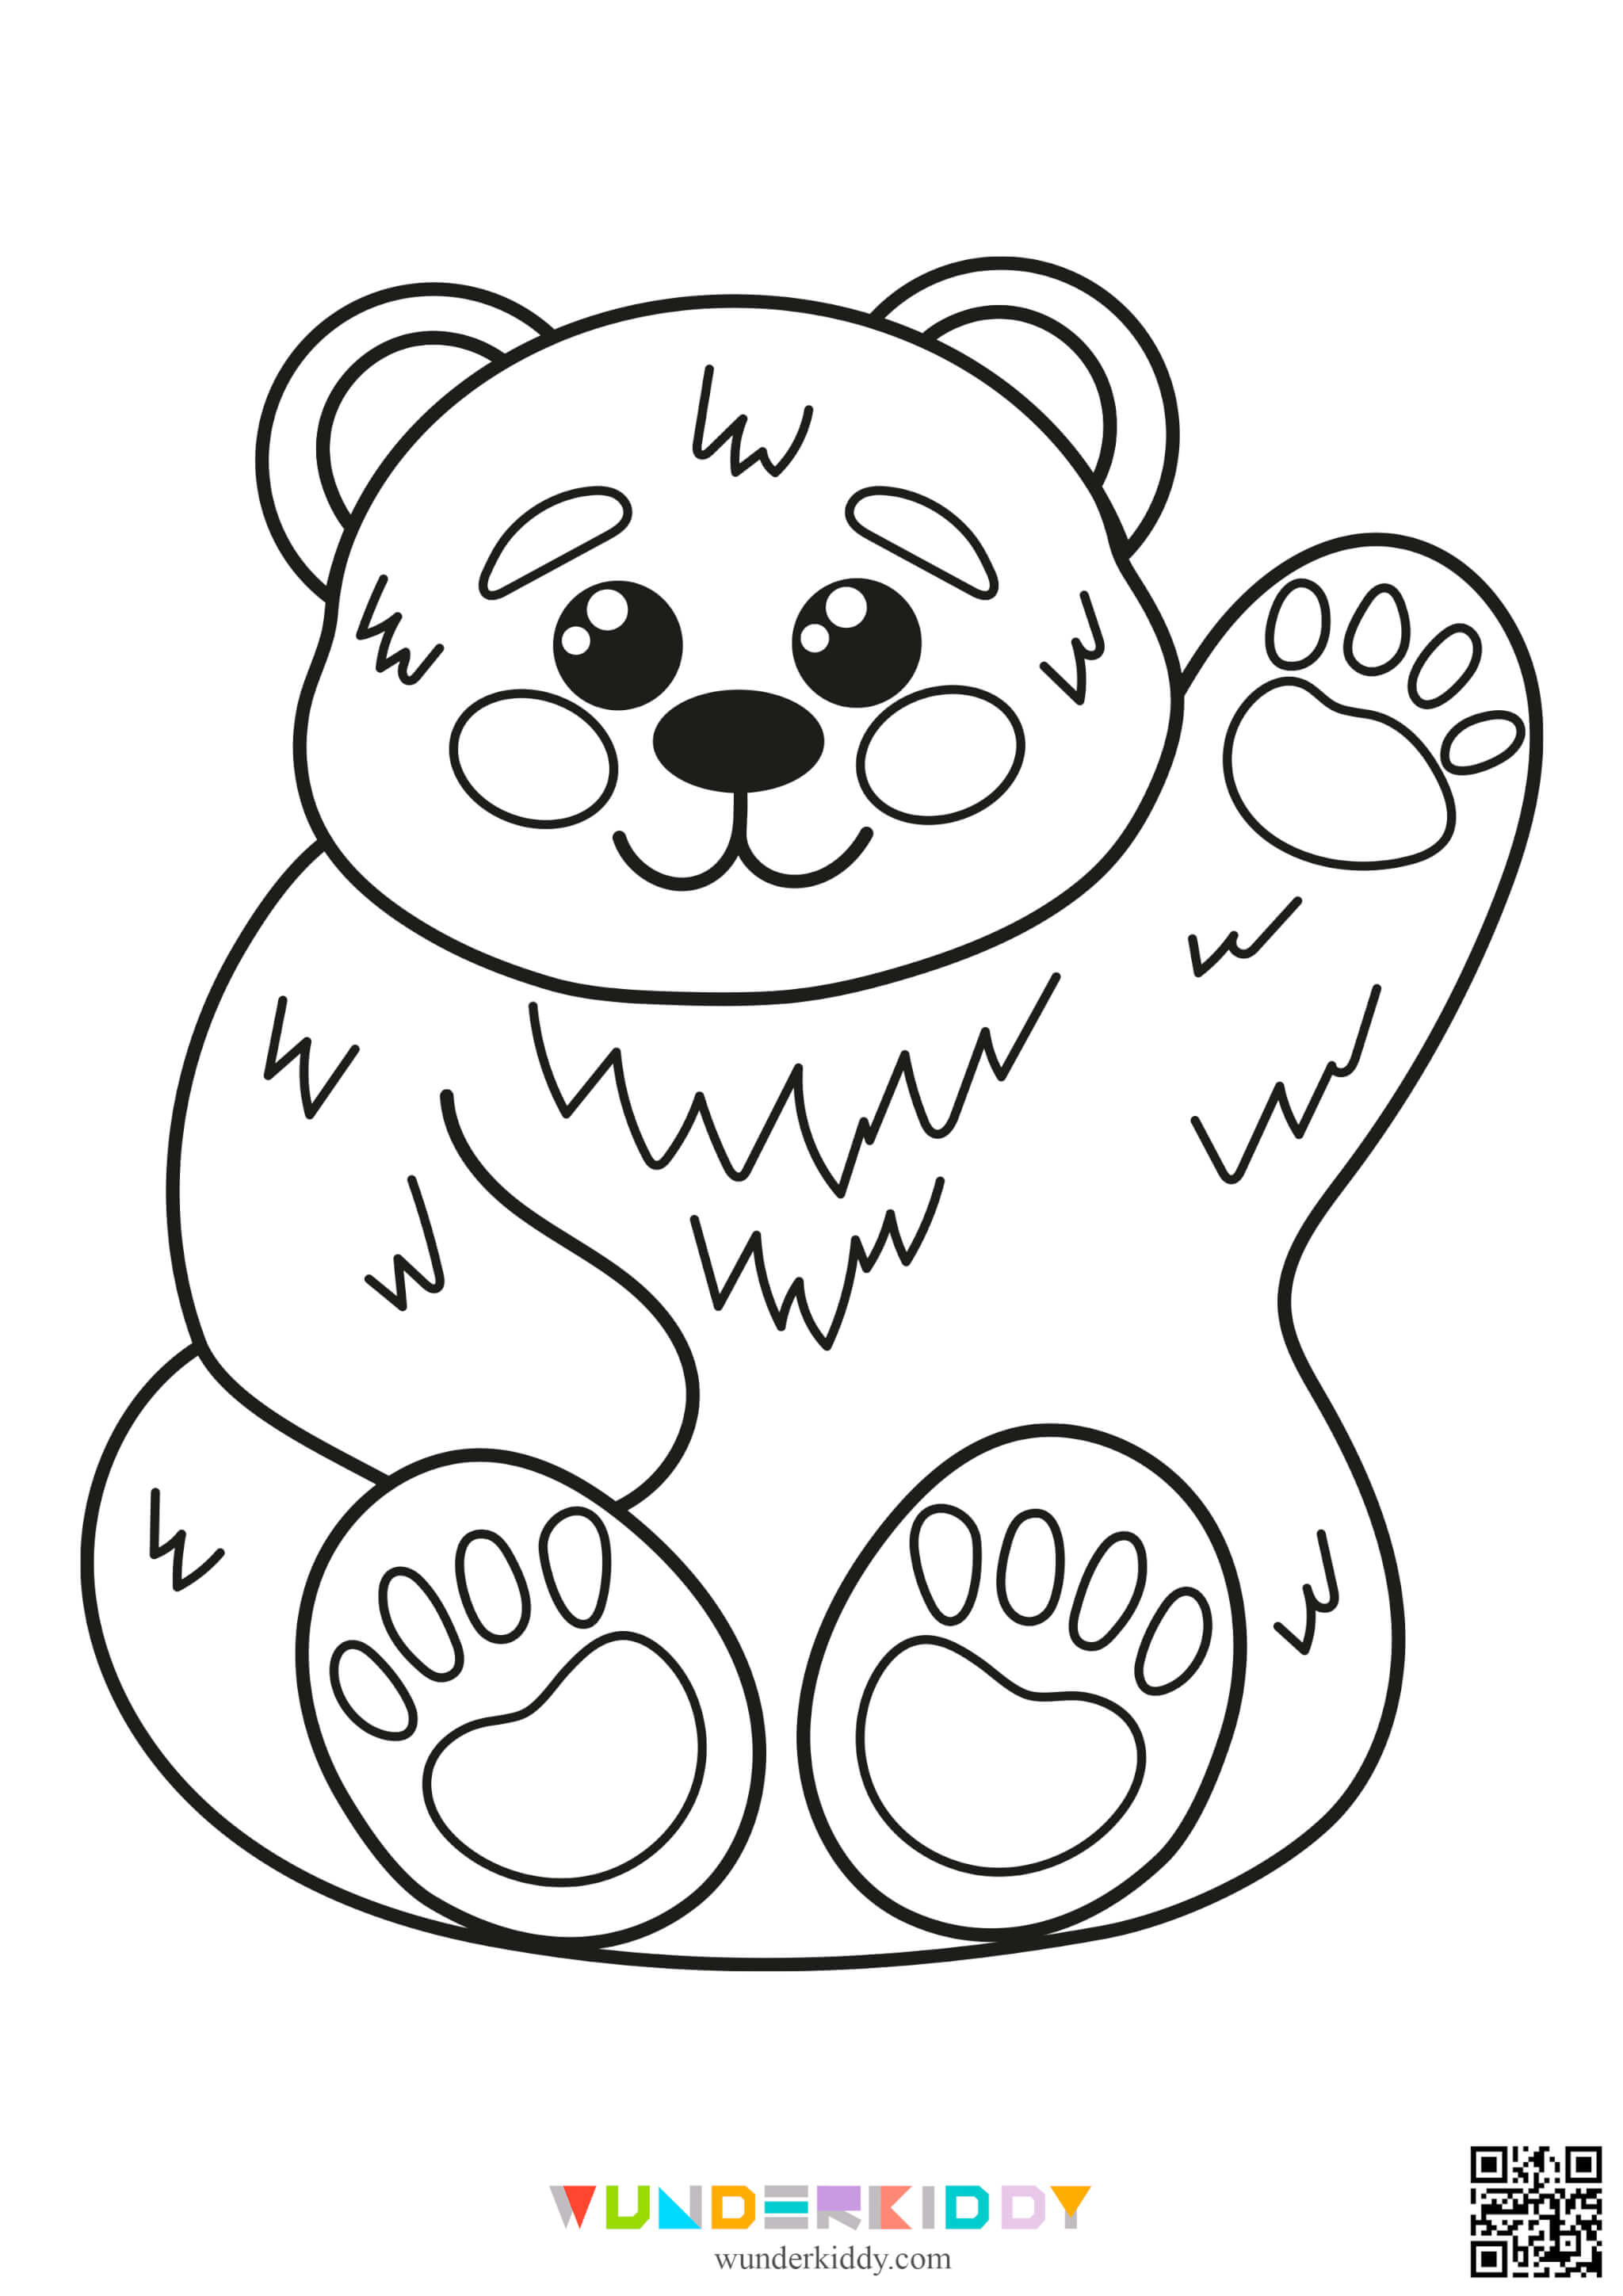 Fall Coloring Pages - Image 23